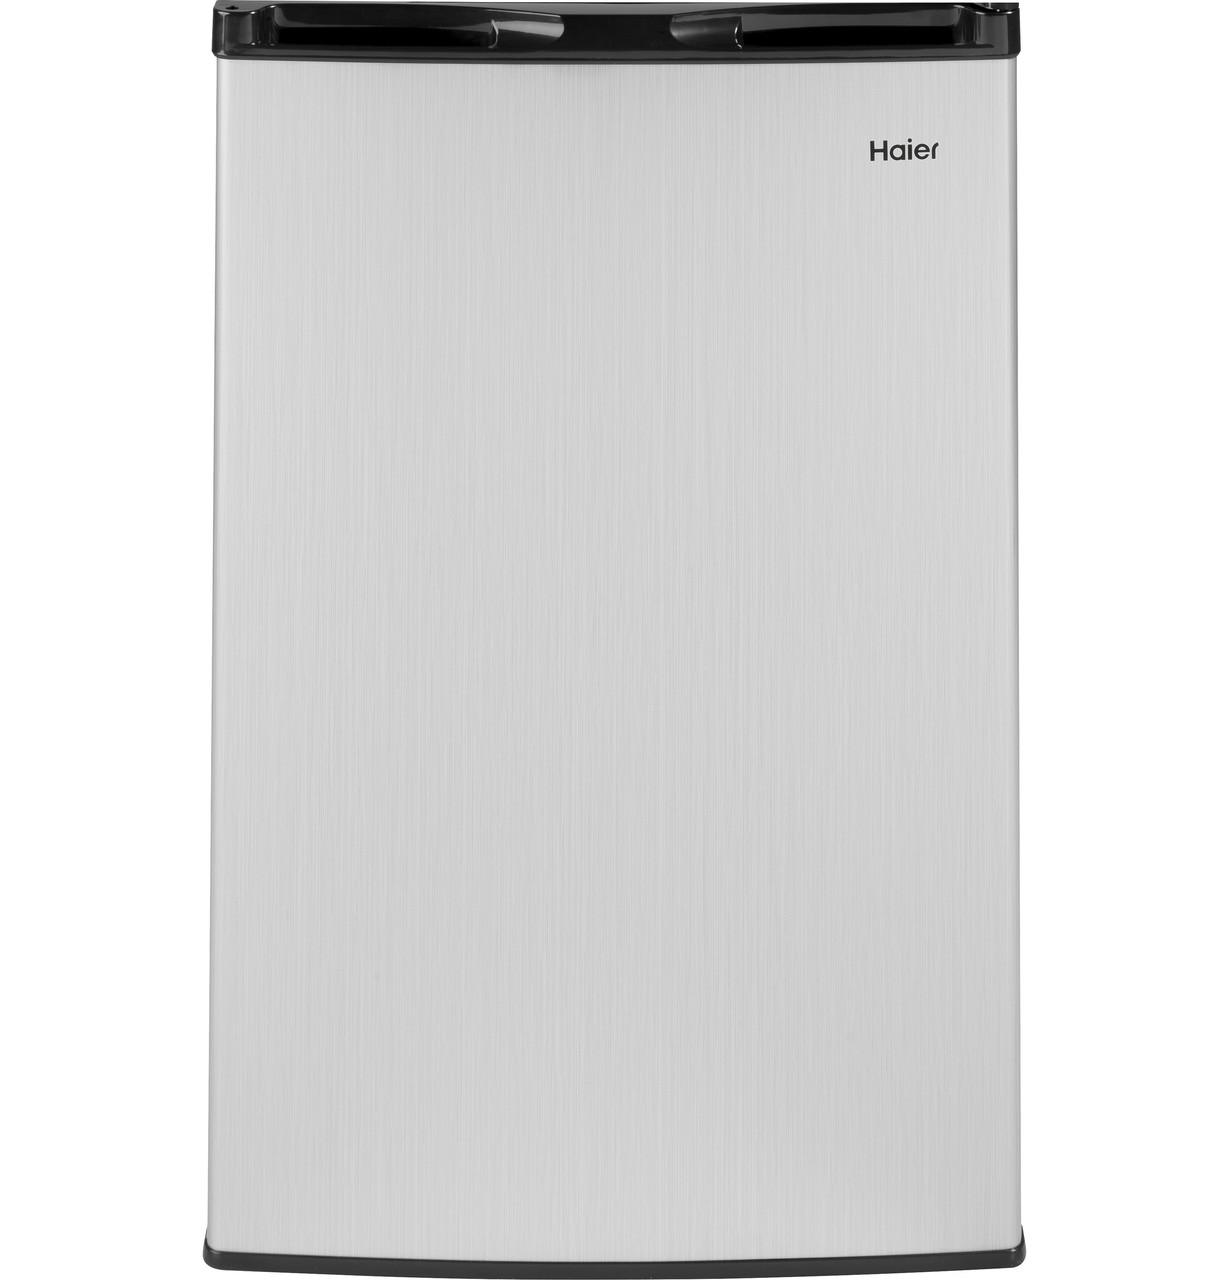 Haier HC46SF10SV 4.5 cu. ft. Compact Refrigerator with Half-Width